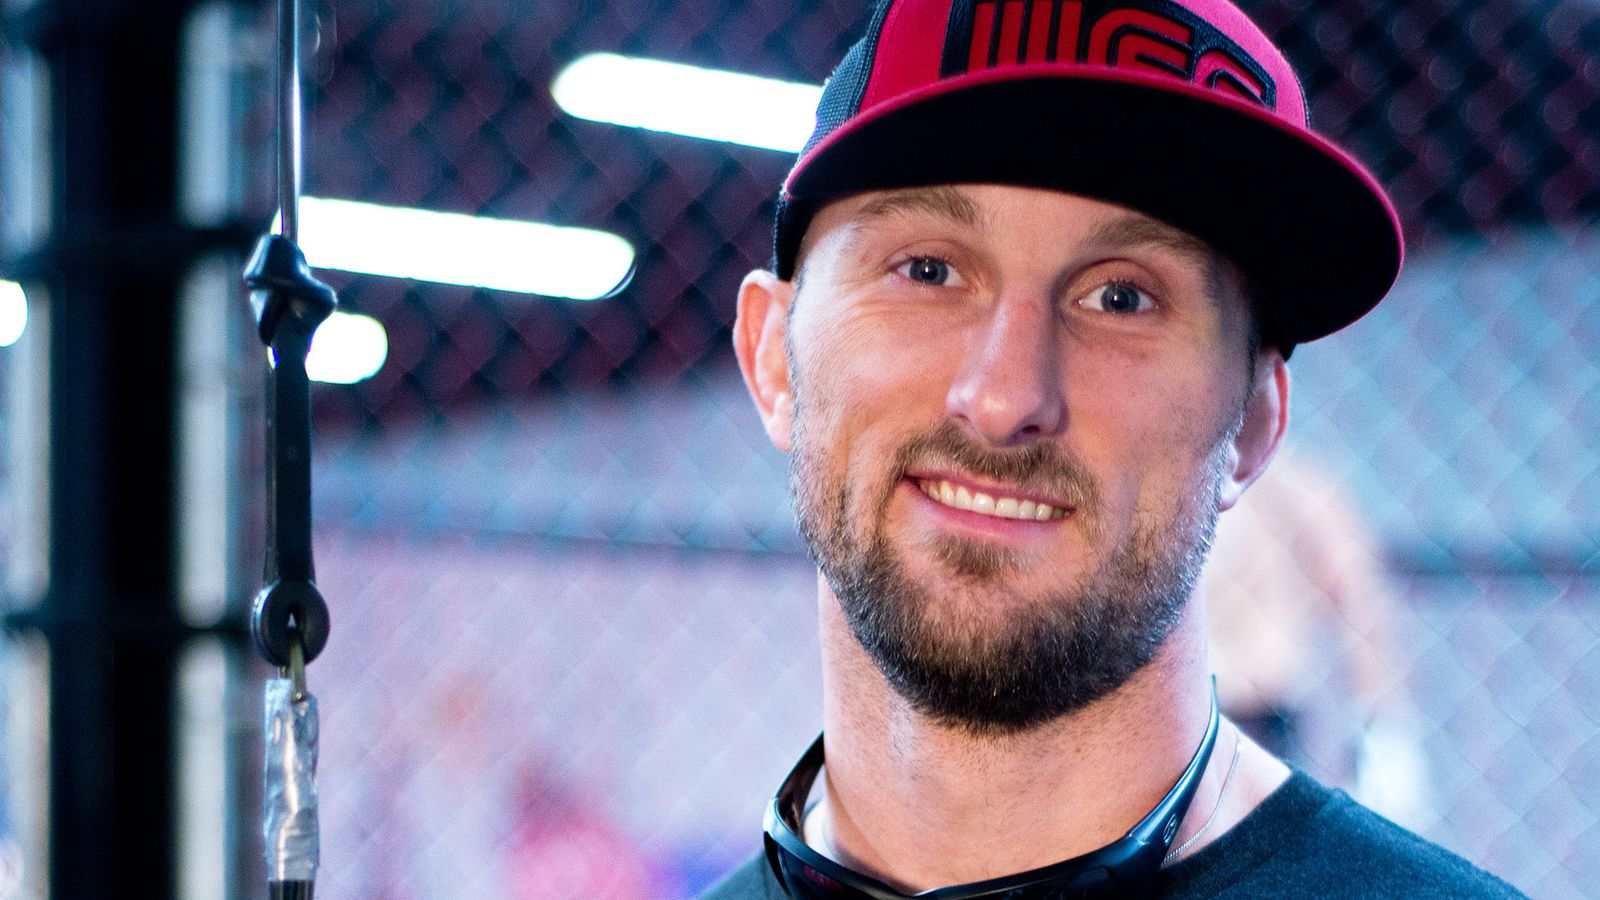 Bubba McDaniel on UFC earnings: 'I'm not complaining at all' - Bloody Elbow